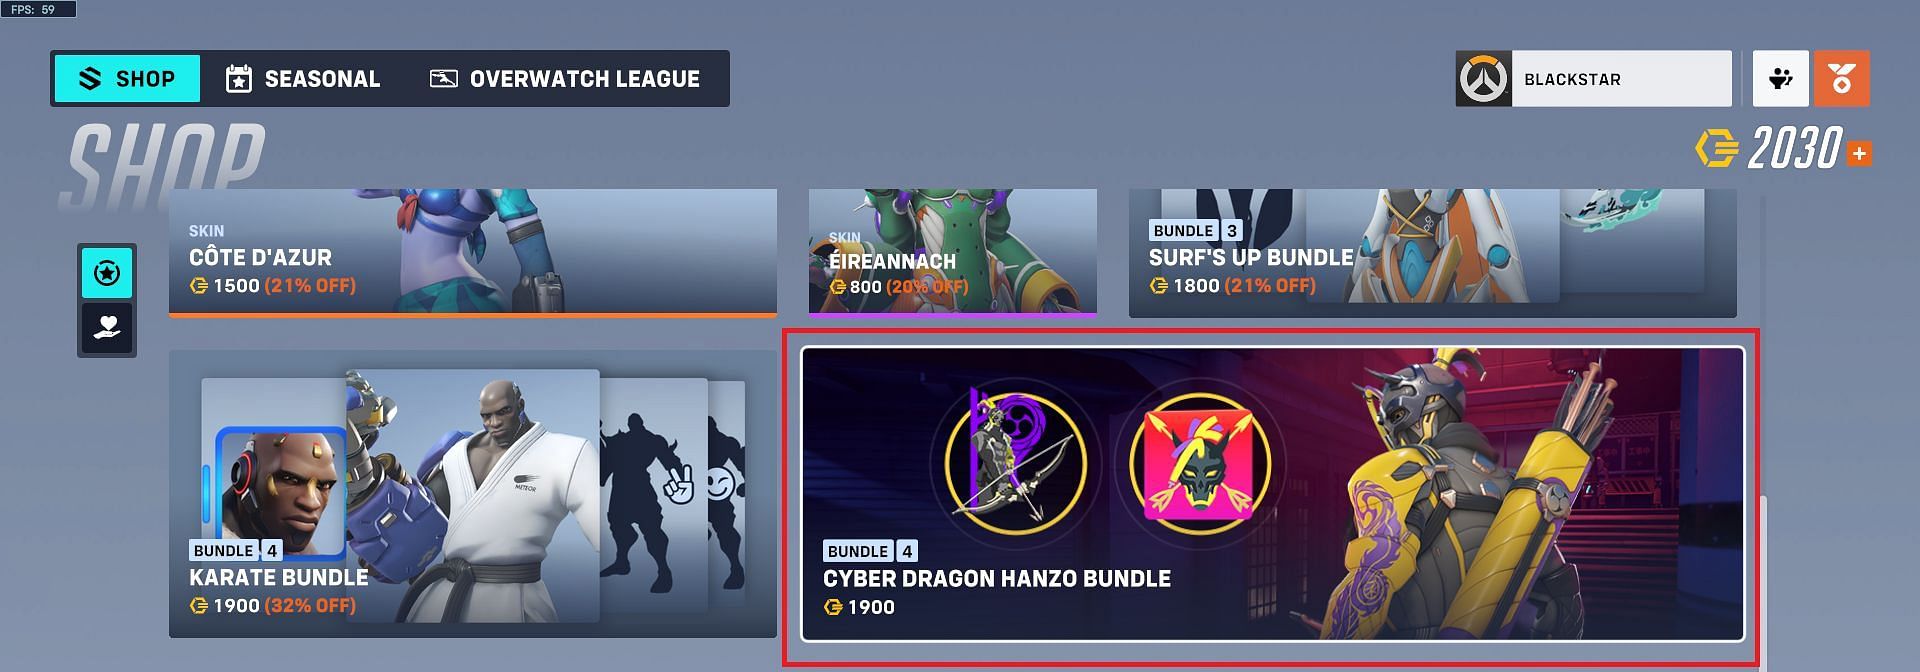 Cyber Dragon Hanzo Bundle in the in-game shop (Image via Blizzard Entertainment)